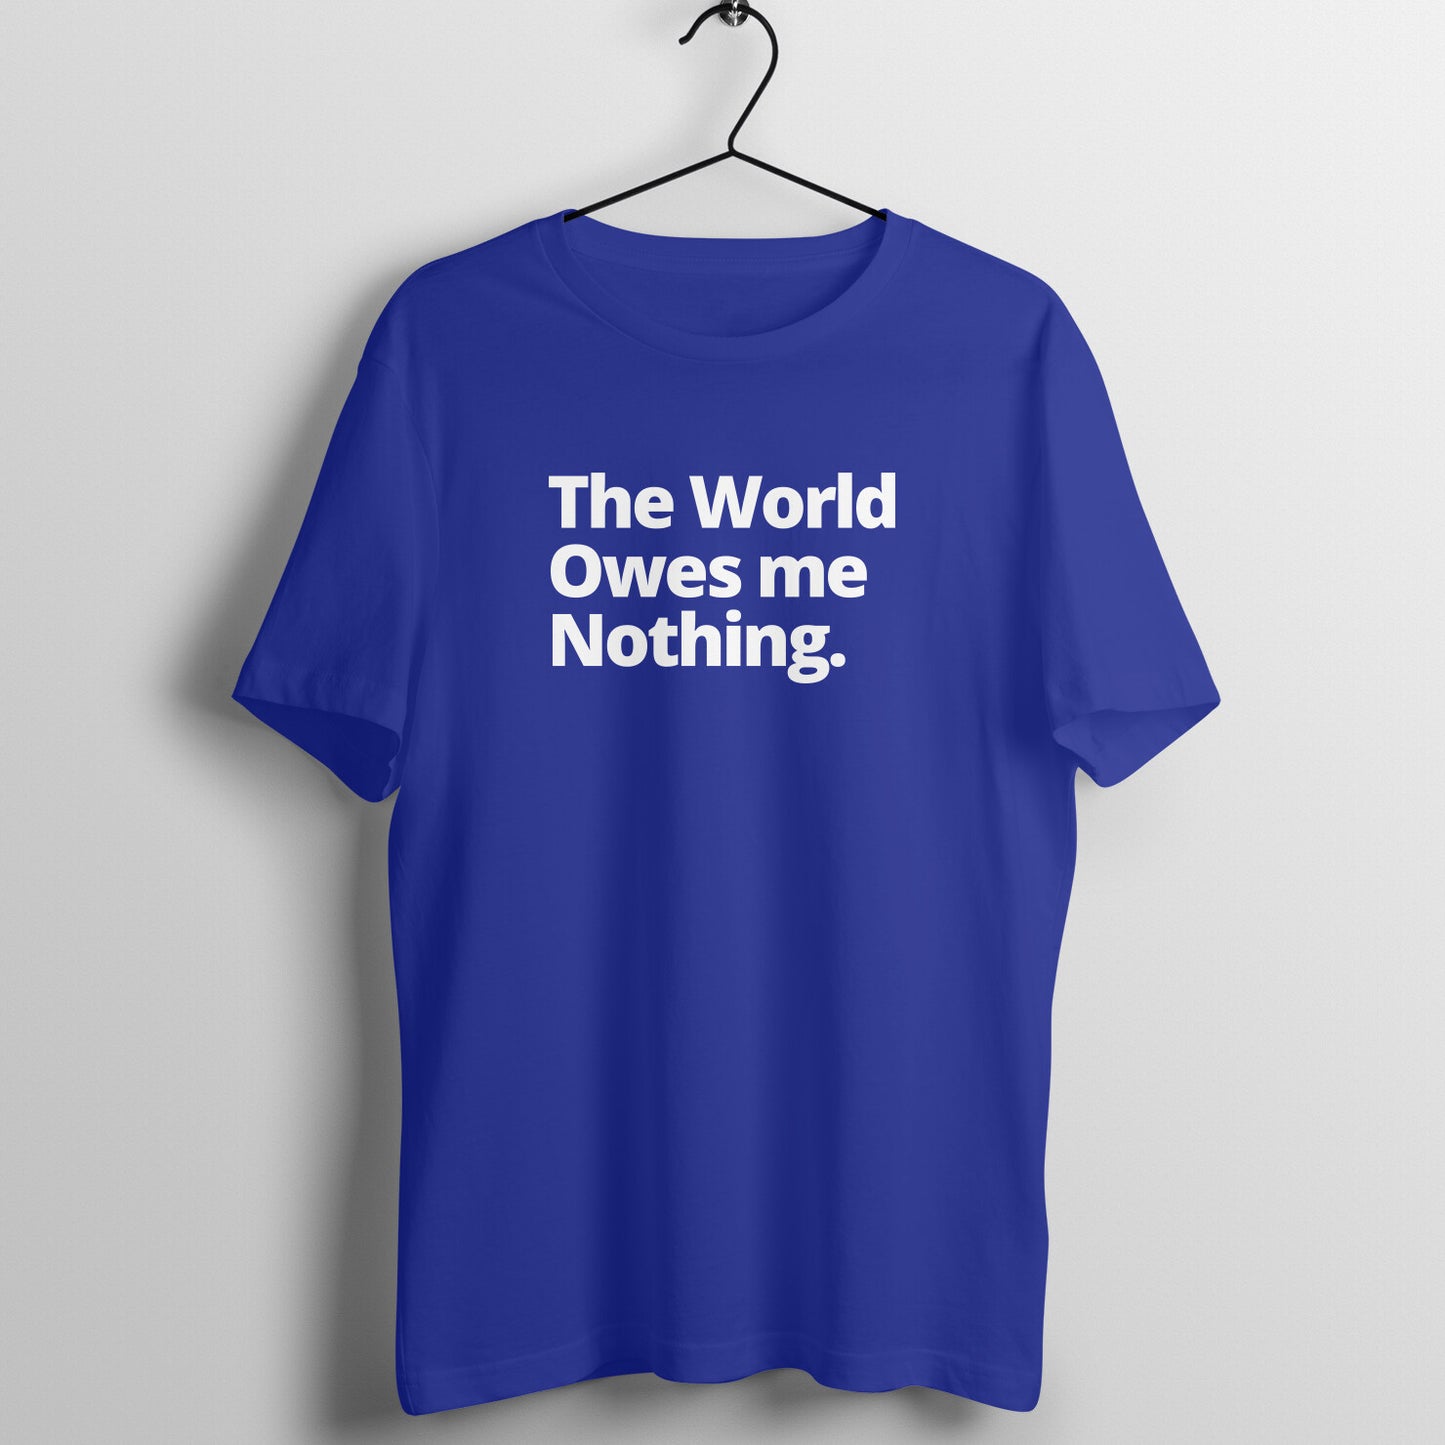 The World owes me Nothing Printed T-Shirt